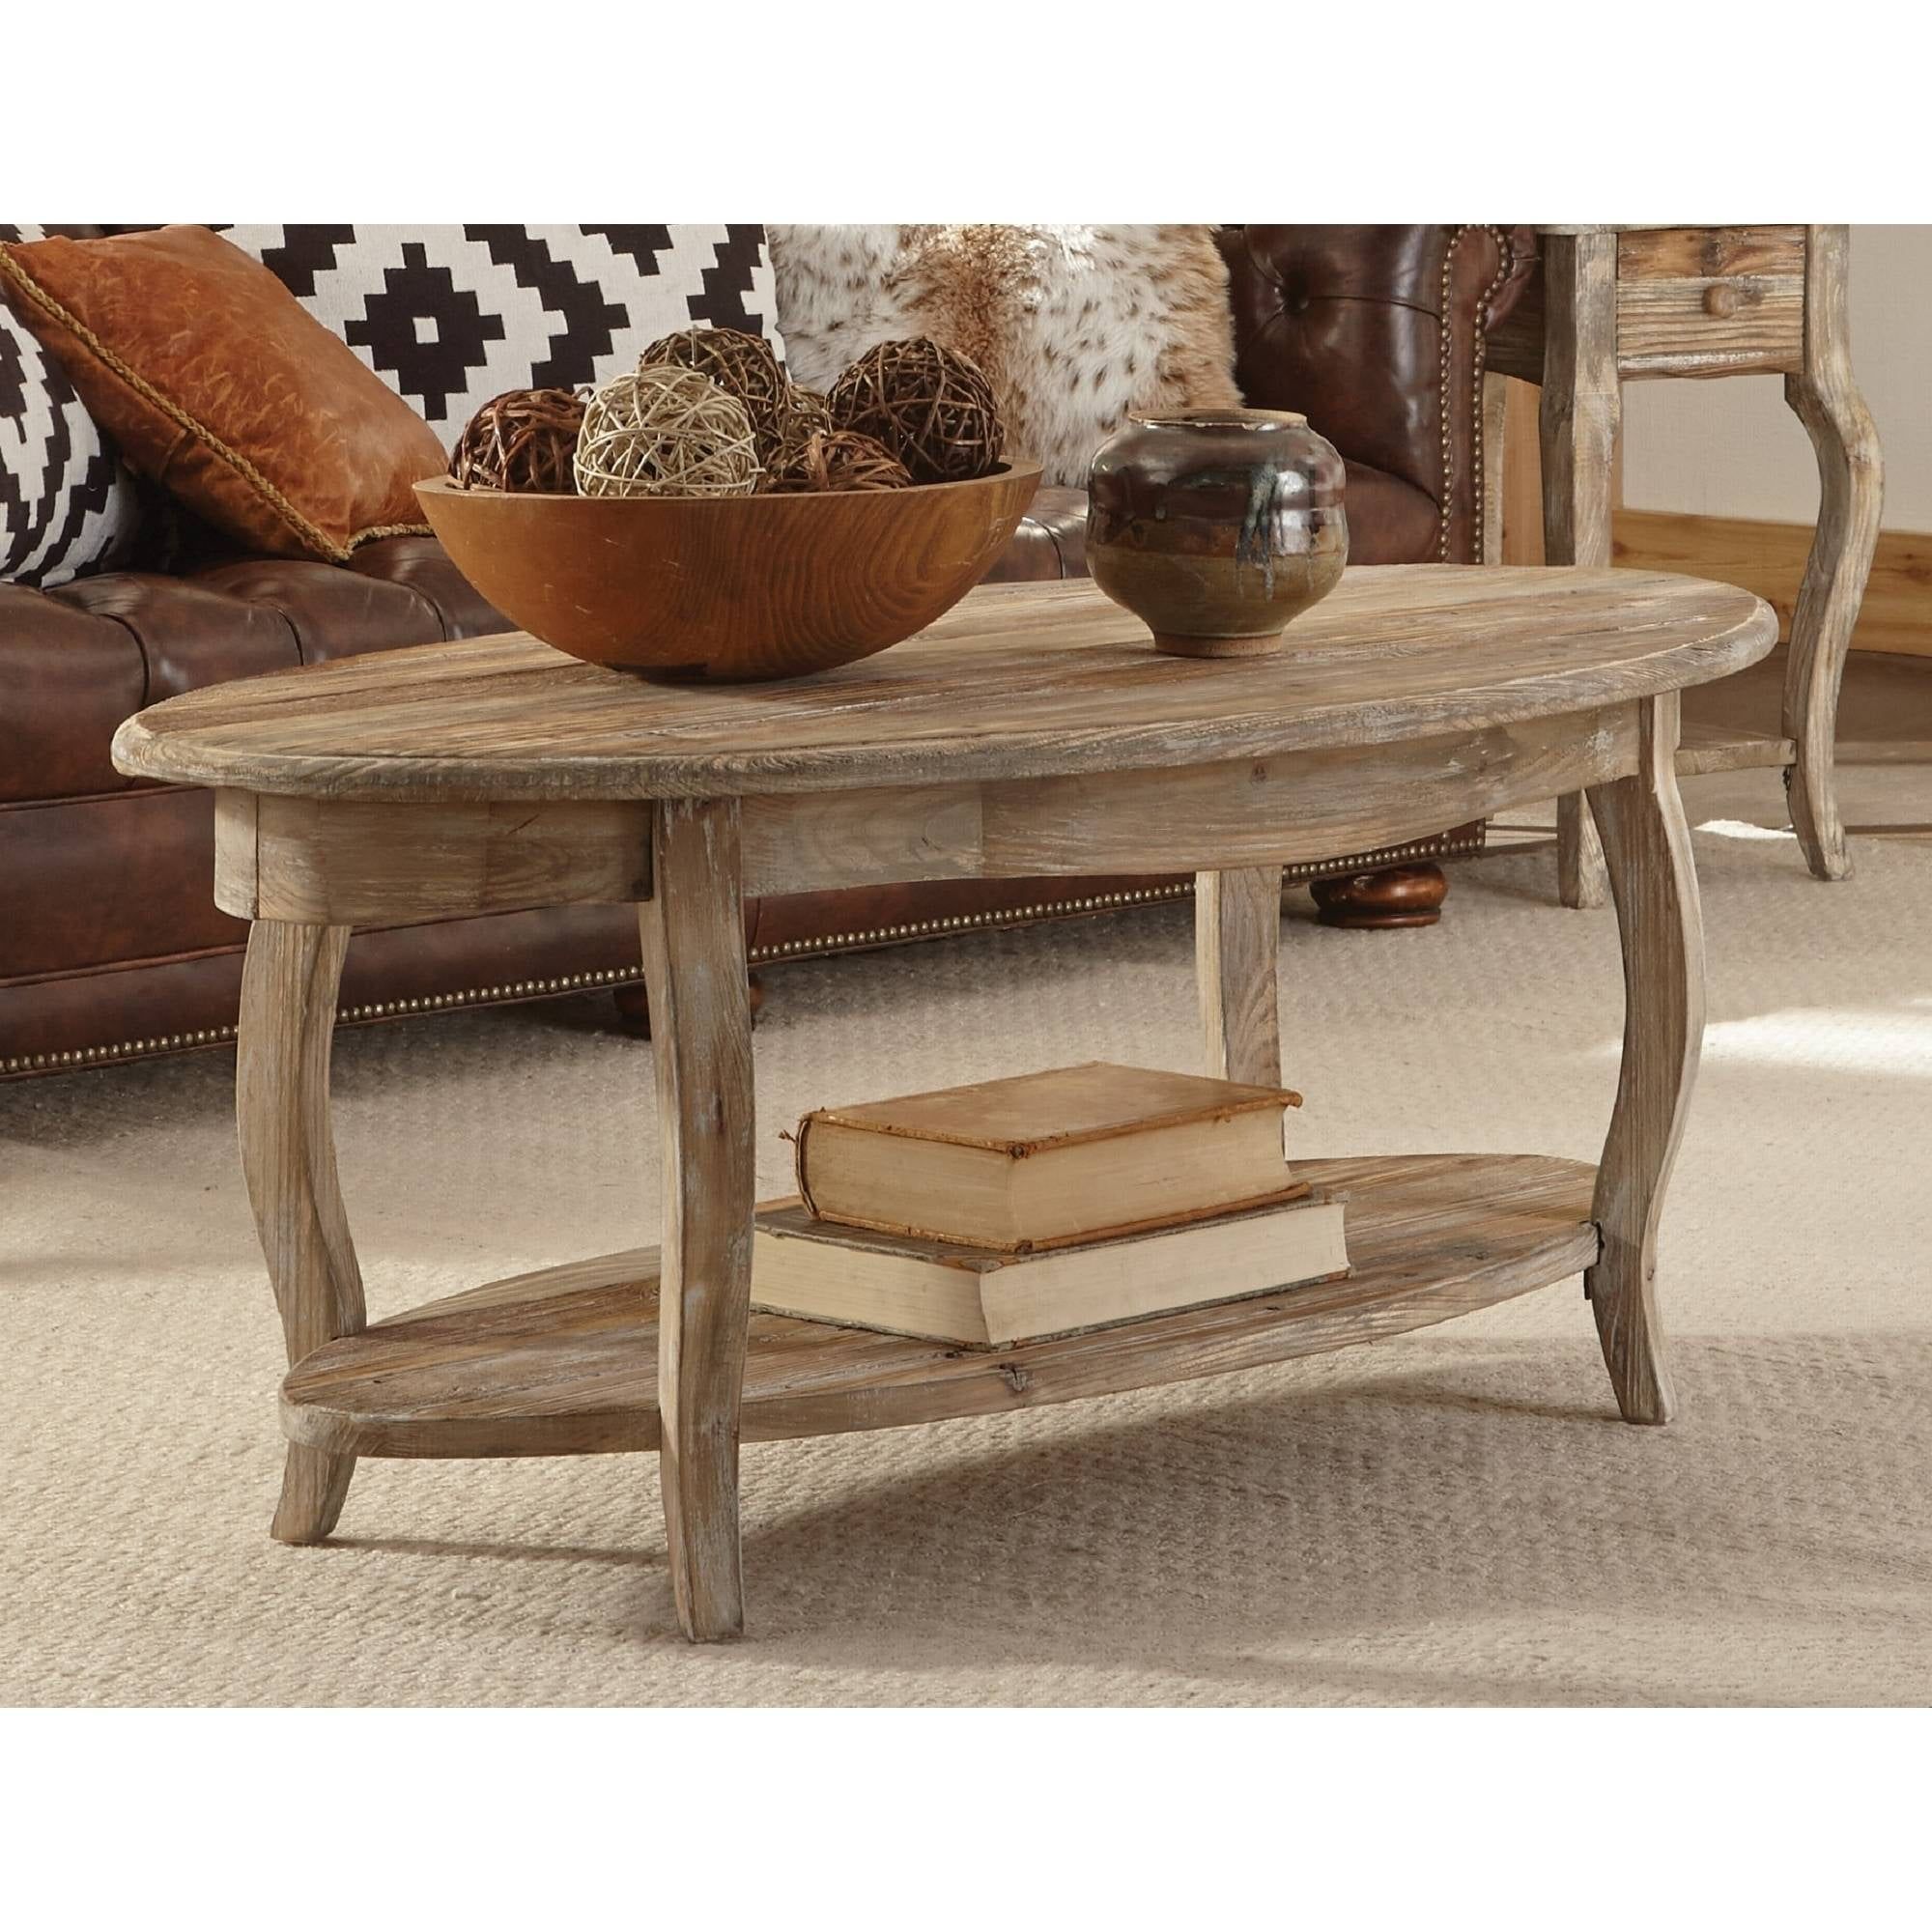 Alaterre Rustic Reclaimed Oval Coffee Table, Driftwood – Walmart Regarding Rustic Coffee Tables (View 8 of 15)